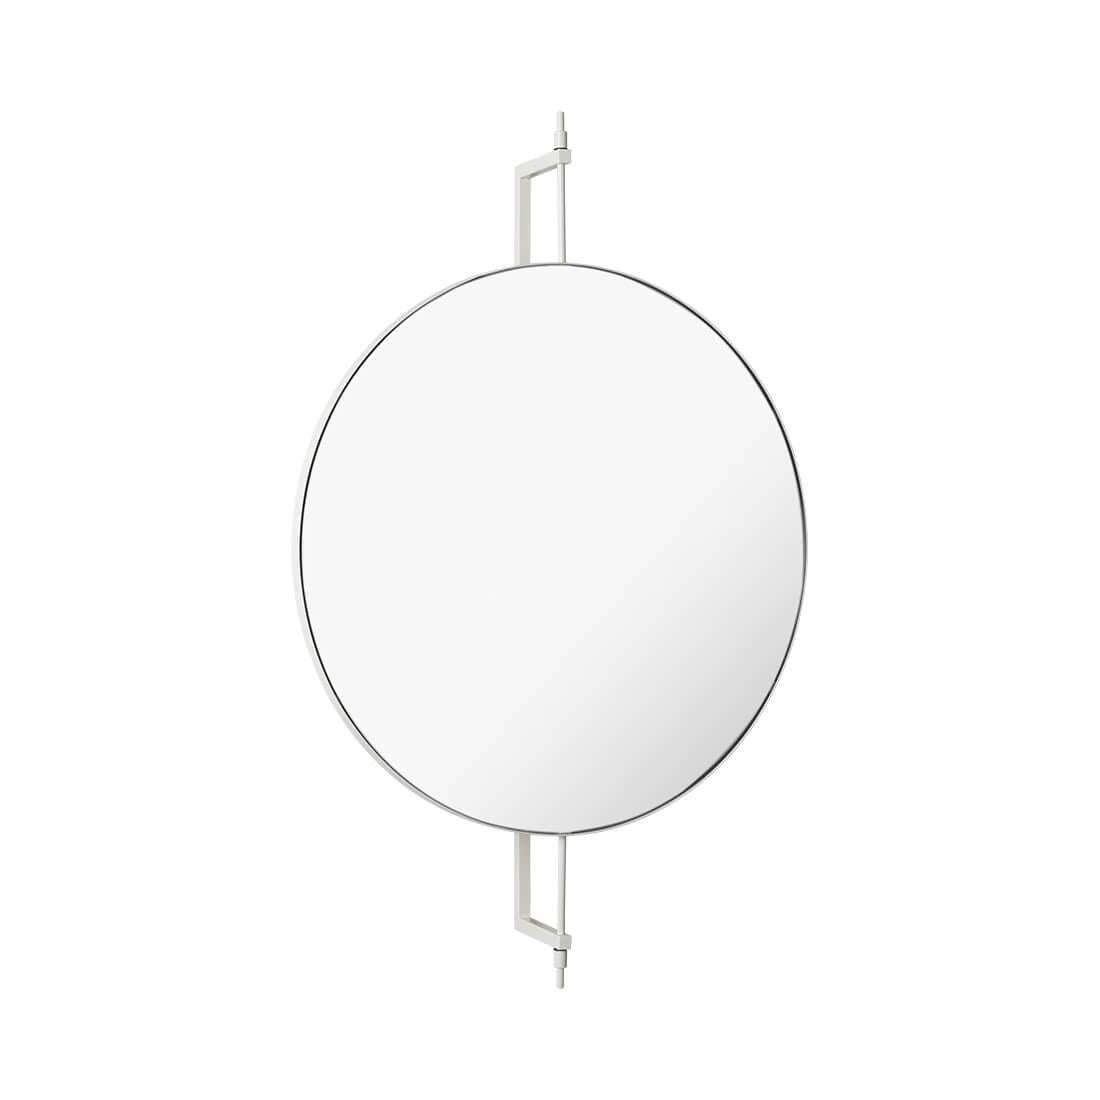 Circle rotating mirror by Kristina Dam Studio
Materials: Stainless steel powder-coated steel. Mirror.
Also available in other colors. 
Dimensions: 13.5 x 60 x H 91cm.

The Modernist furniture collection takes notions of modern design and yet